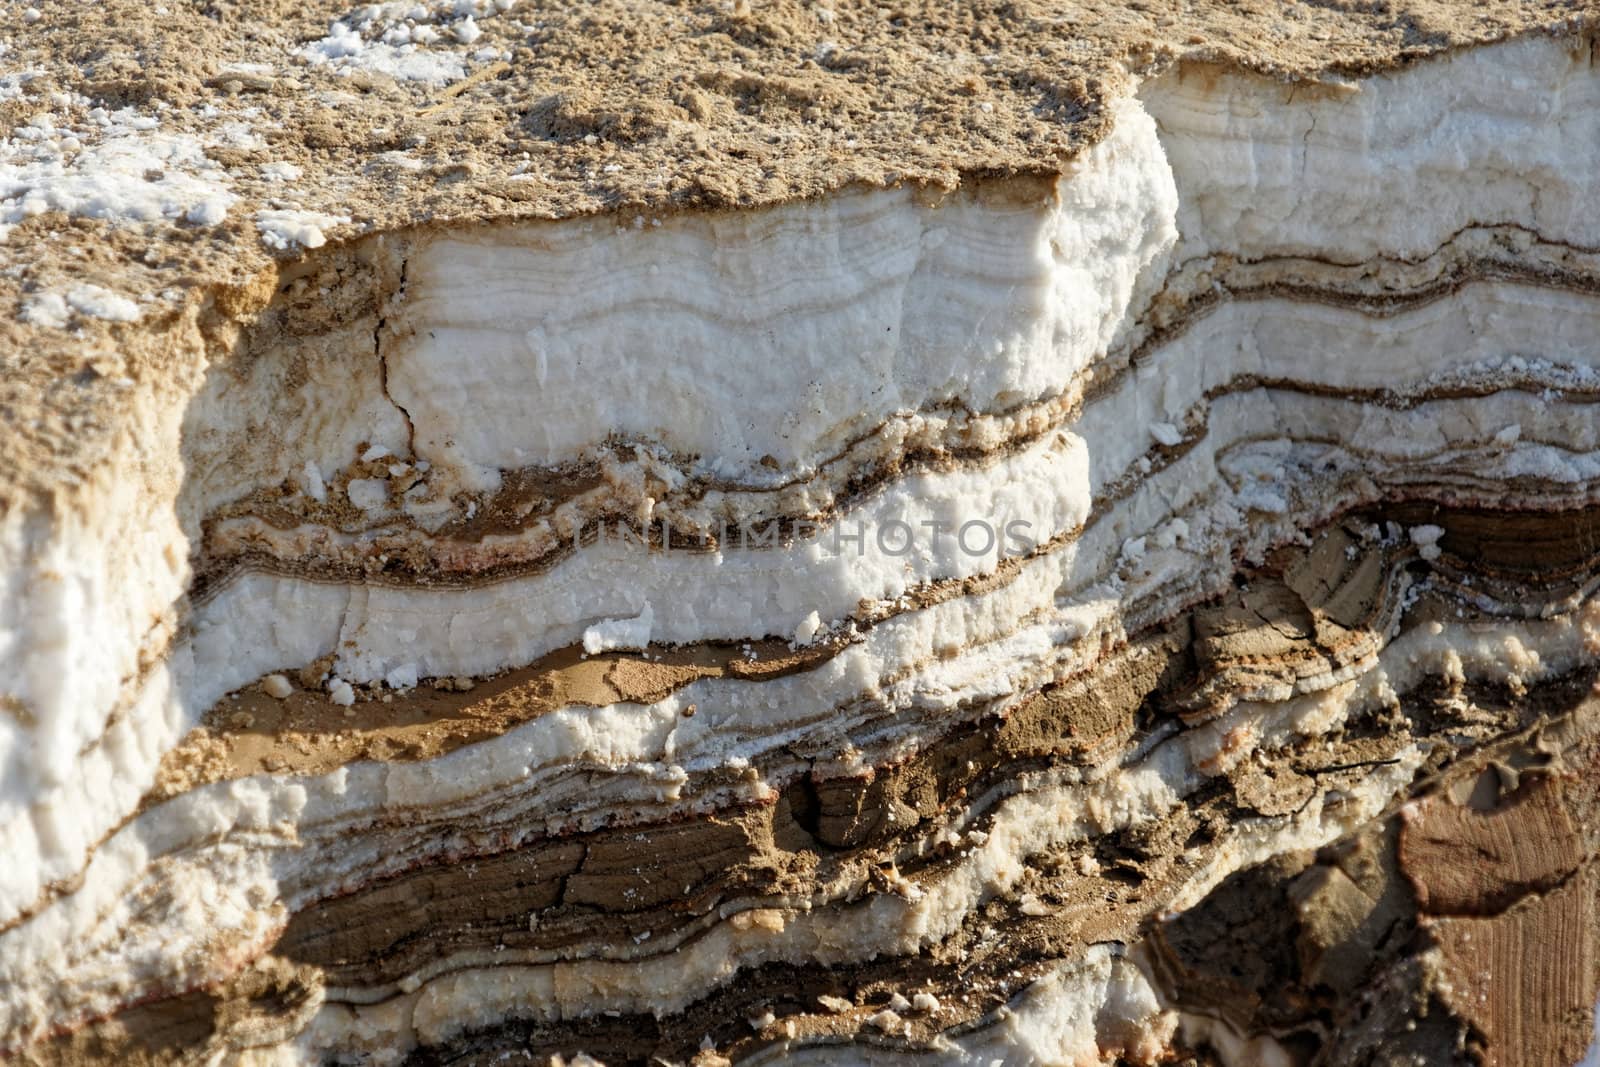 Stratification of salt and mud deposits in alternating storage on the banks of the Dead Sea in Jordan, middle east